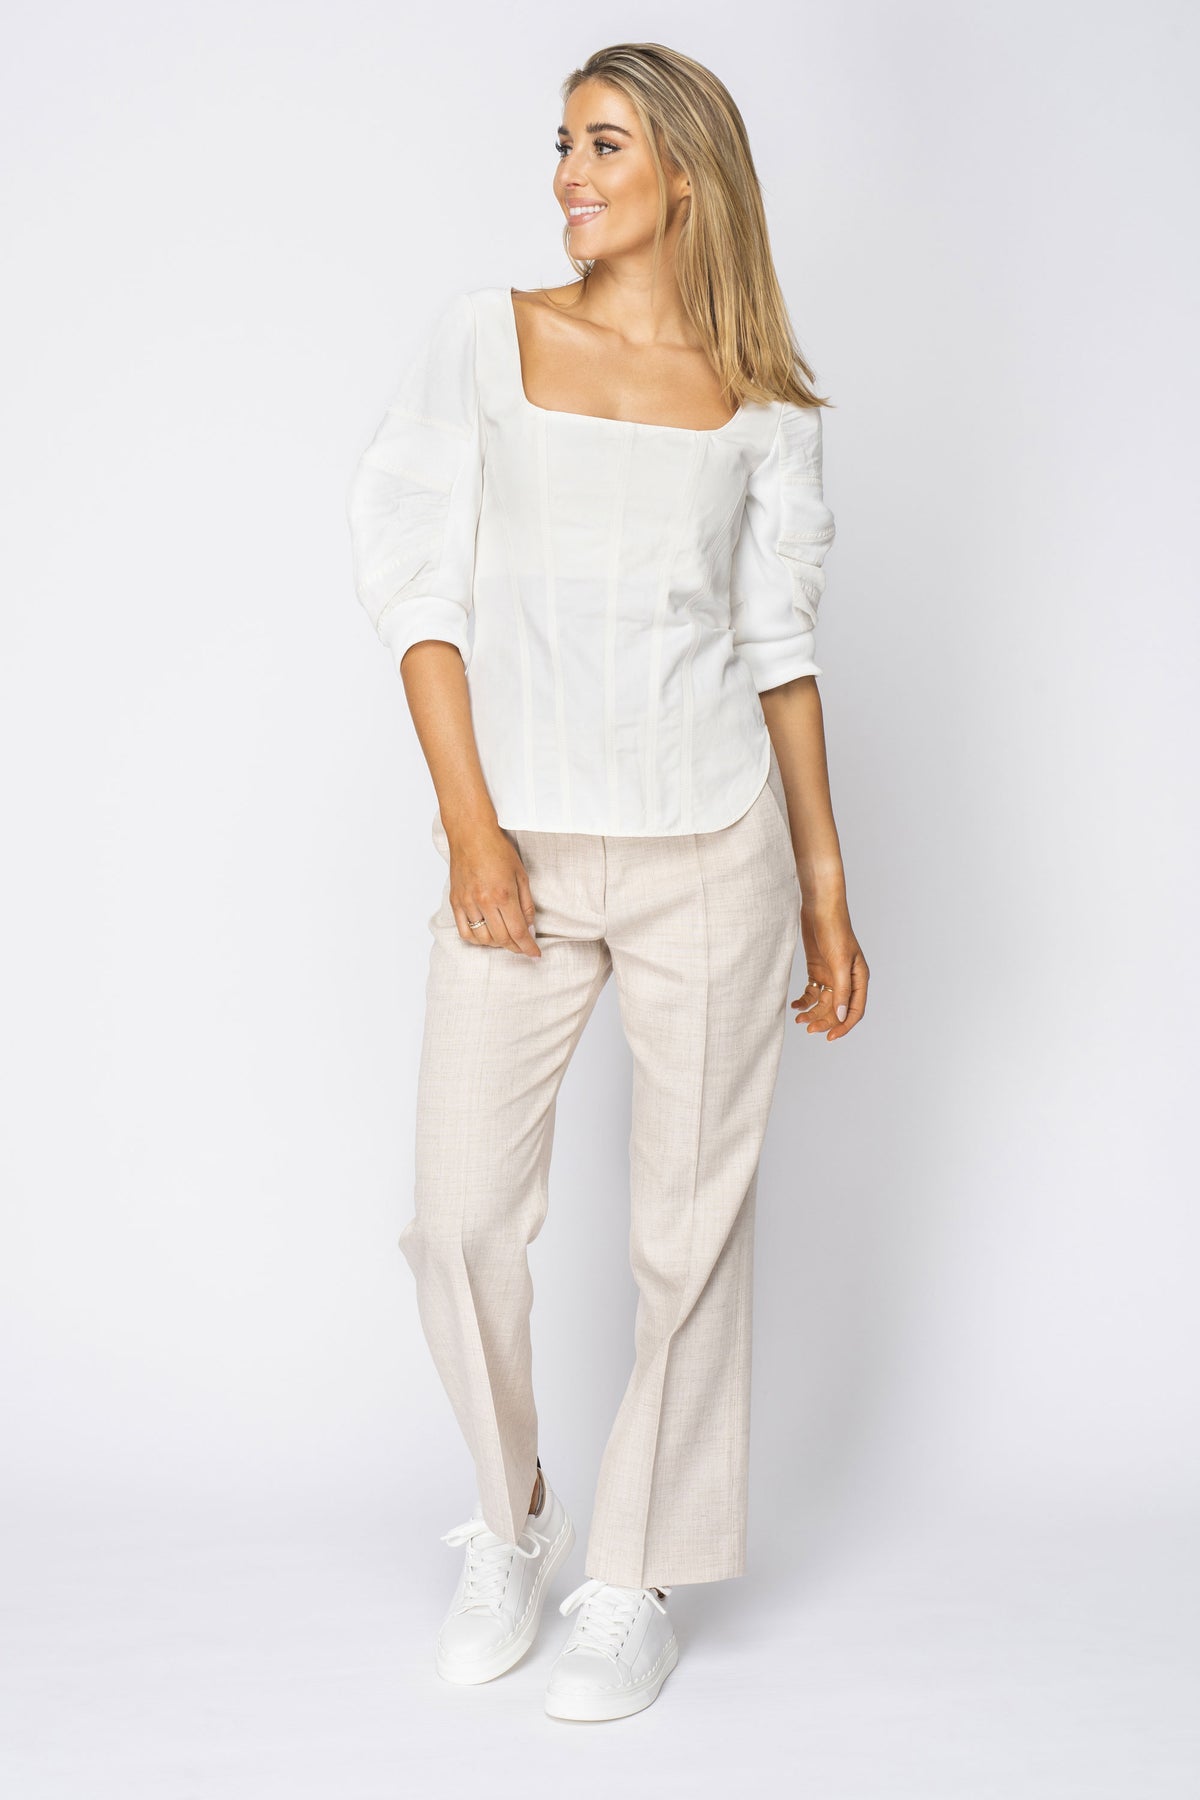 Stella McCartney Cream Square Neck Top With Puffy Sleeve